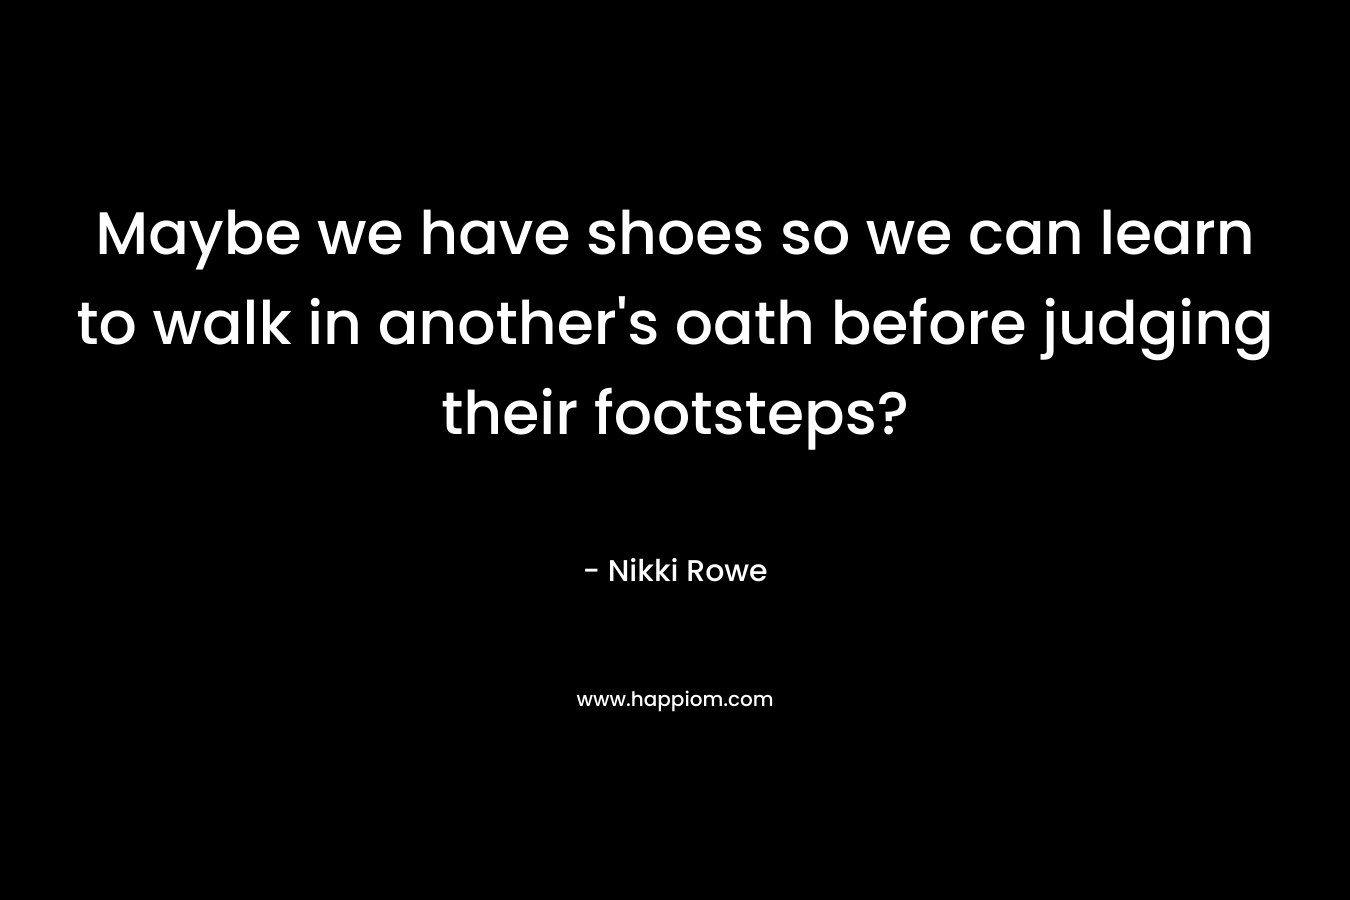 Maybe we have shoes so we can learn to walk in another’s oath before judging their footsteps? – Nikki Rowe